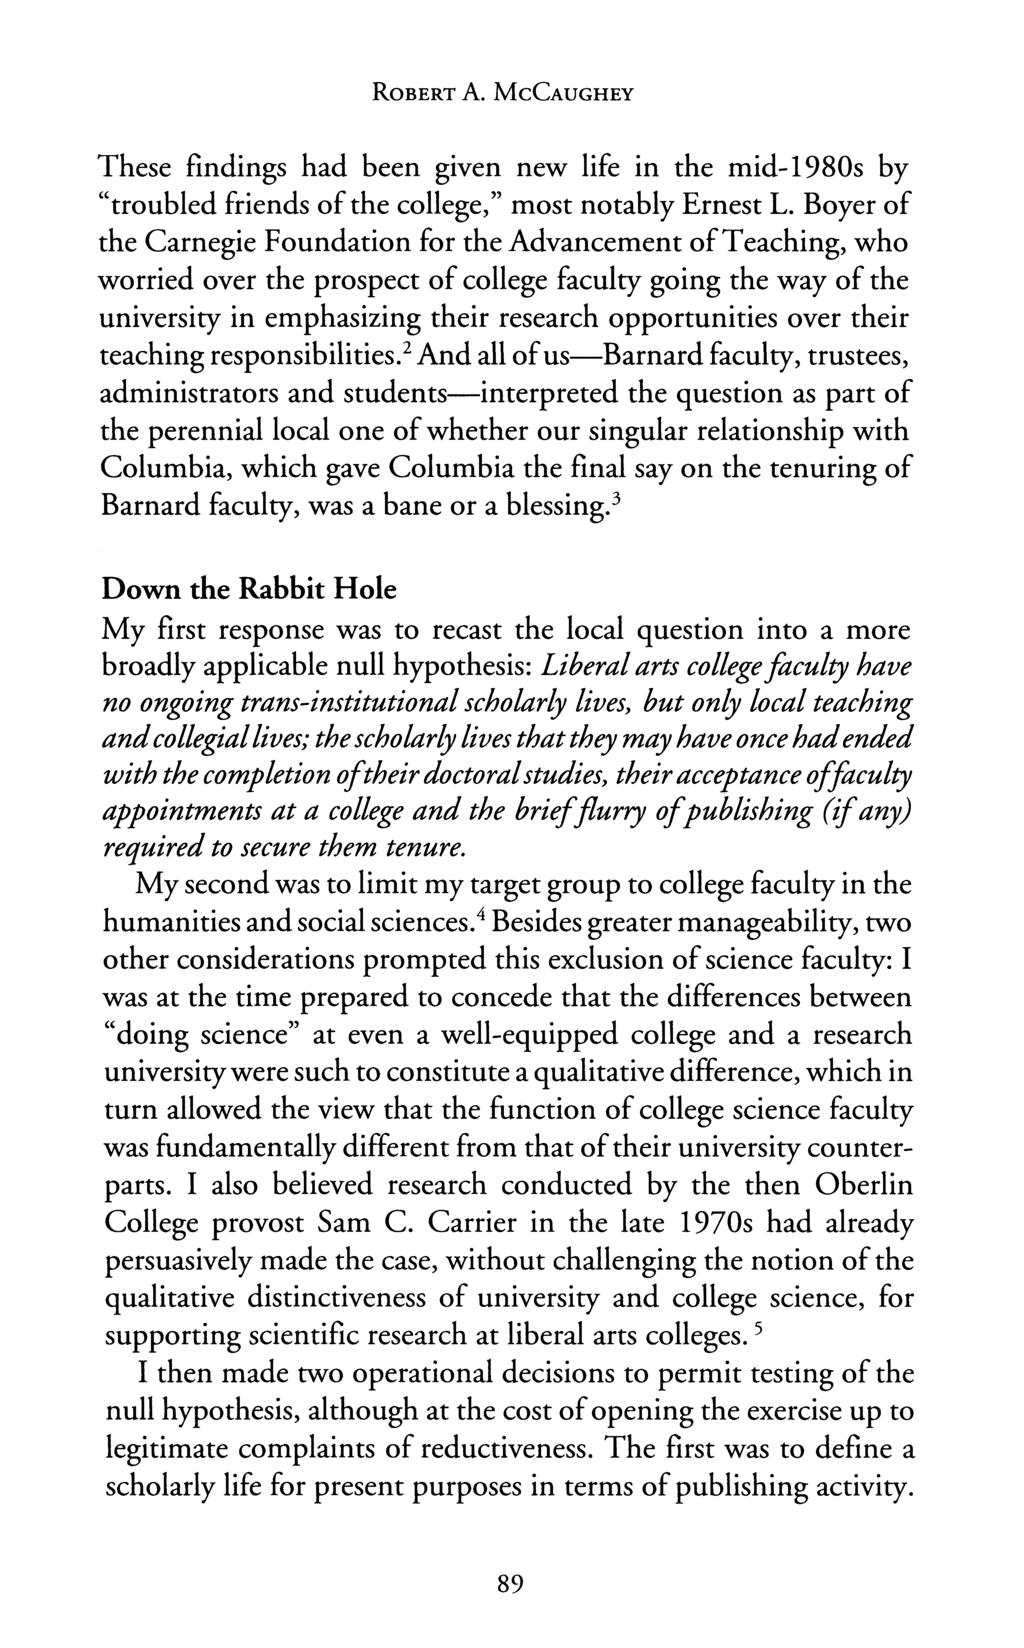 ROBERT A. McCAUGHEY These findings had been given new life in the mid-1980s by "troubled friends of the college," most notably Ernest L.